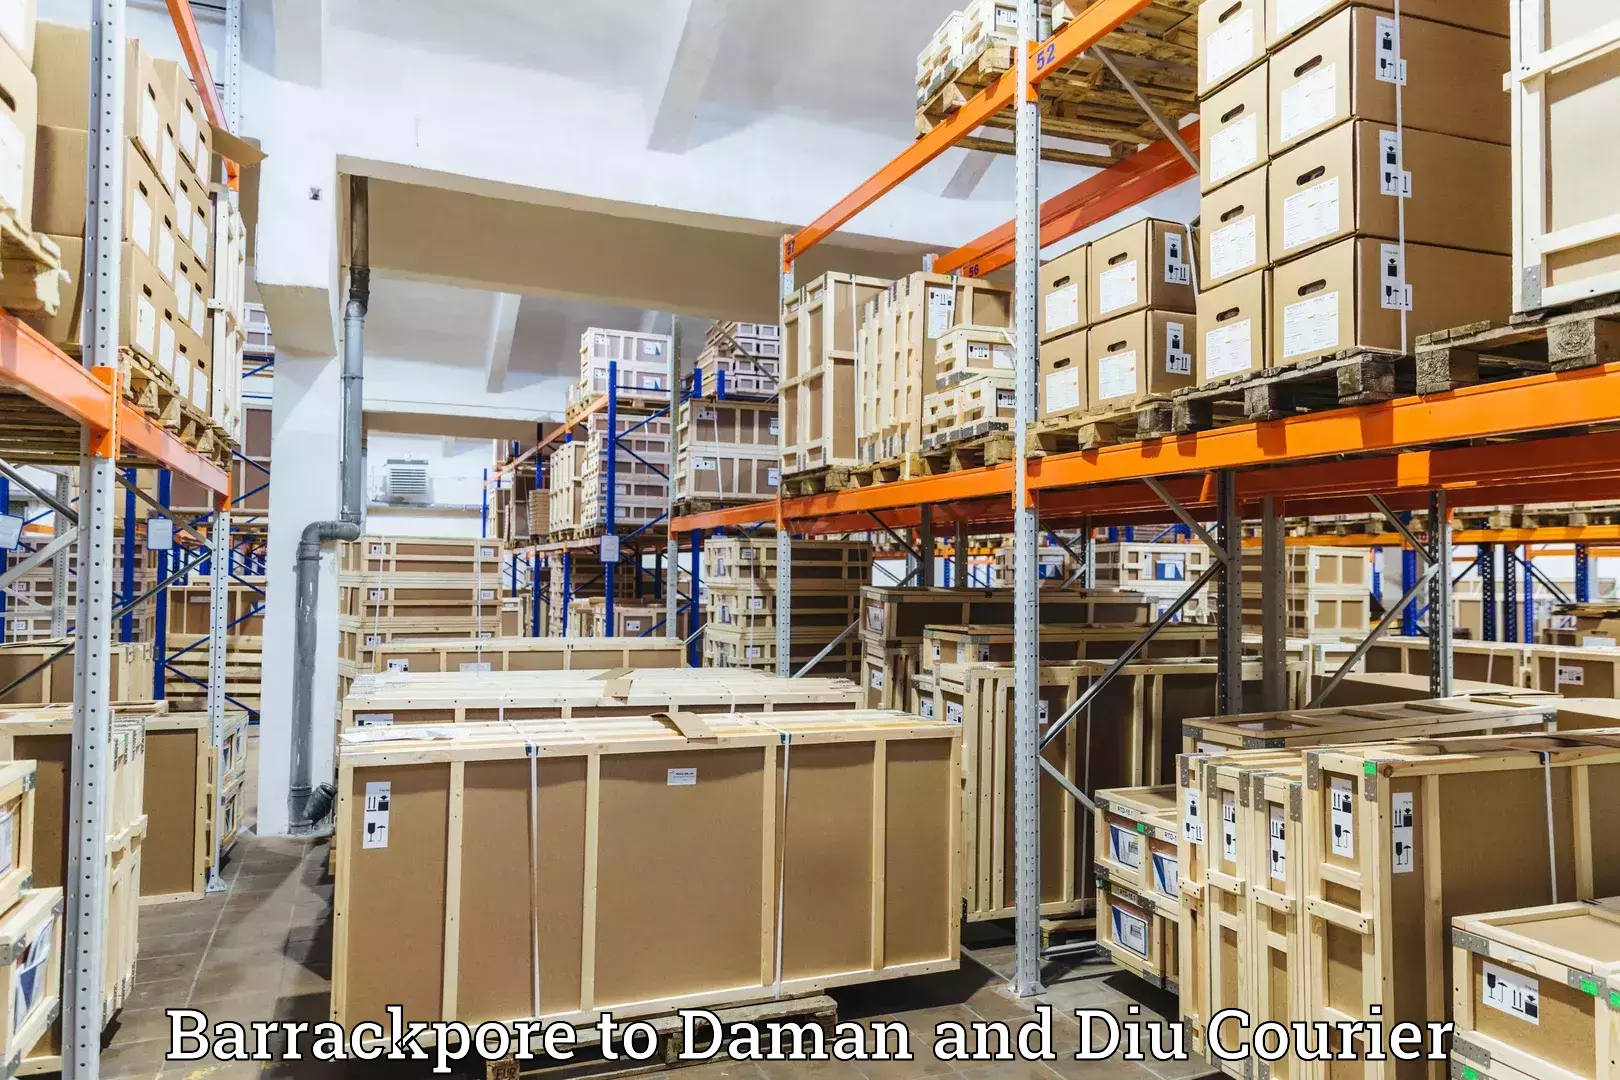 State-of-the-art courier technology Barrackpore to Daman